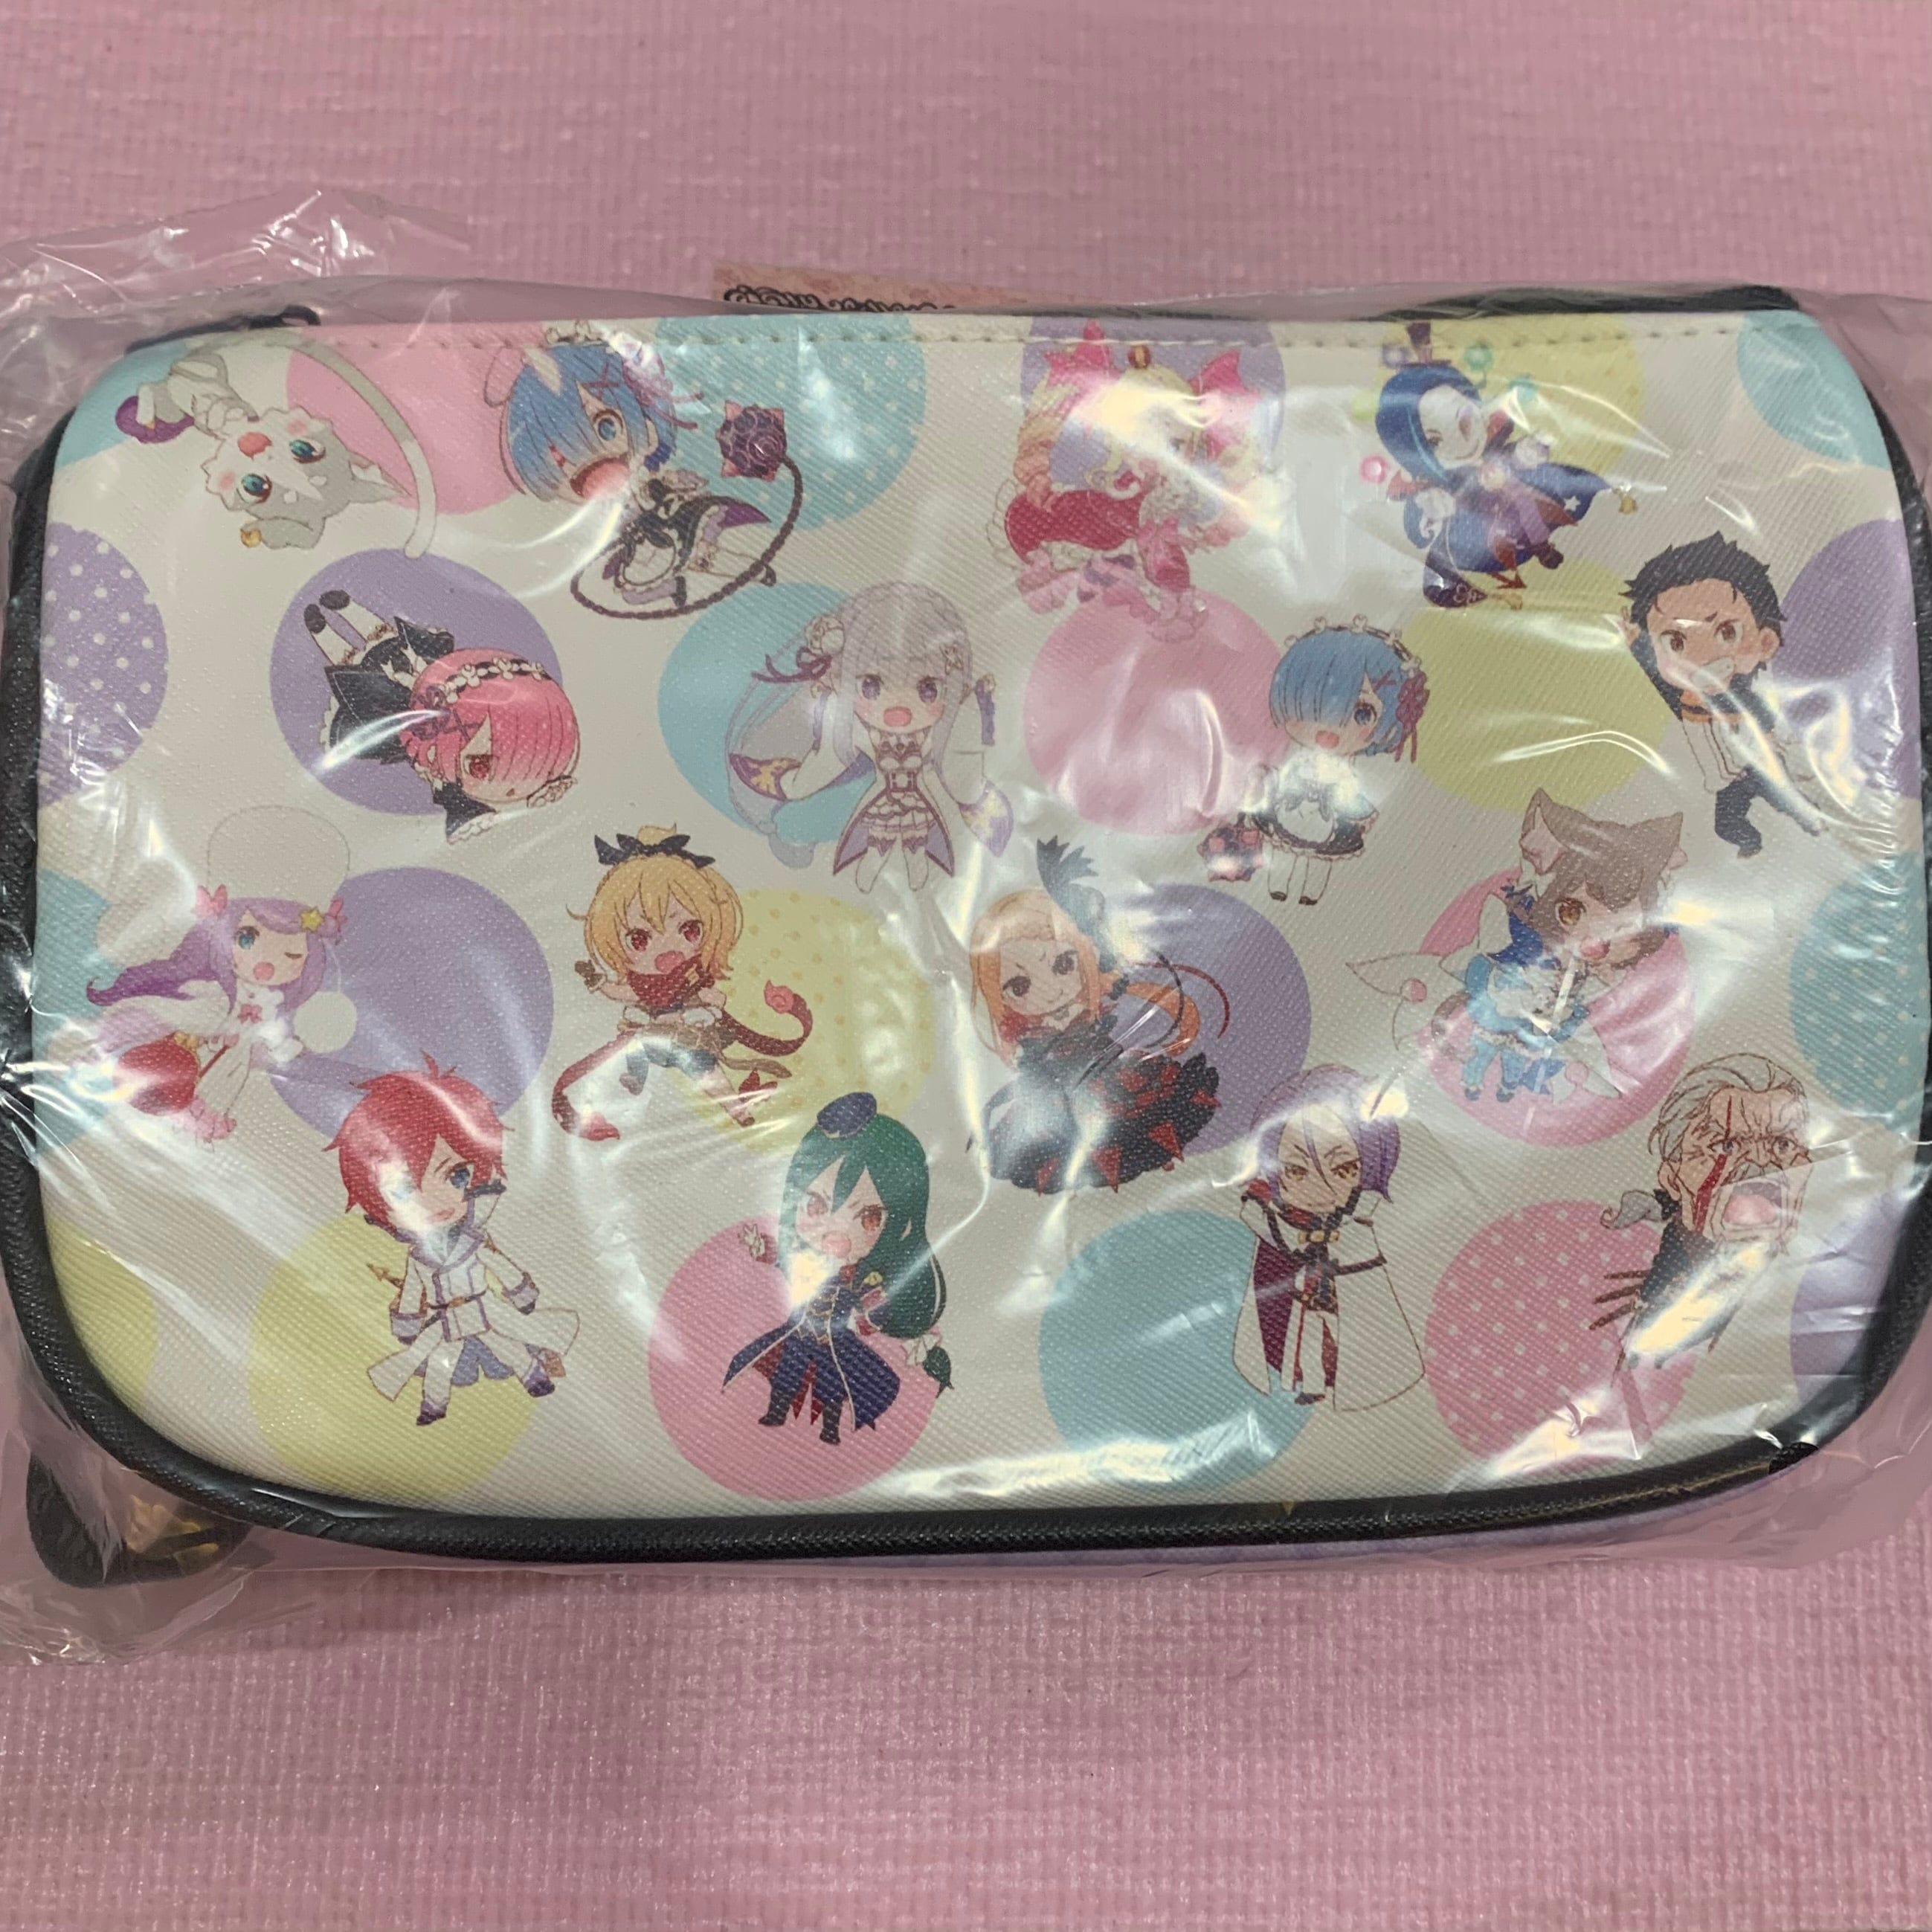 BeeCrazee Re: Life in a different world starting from zero Wristlet D Kawaii Gifts 33844438